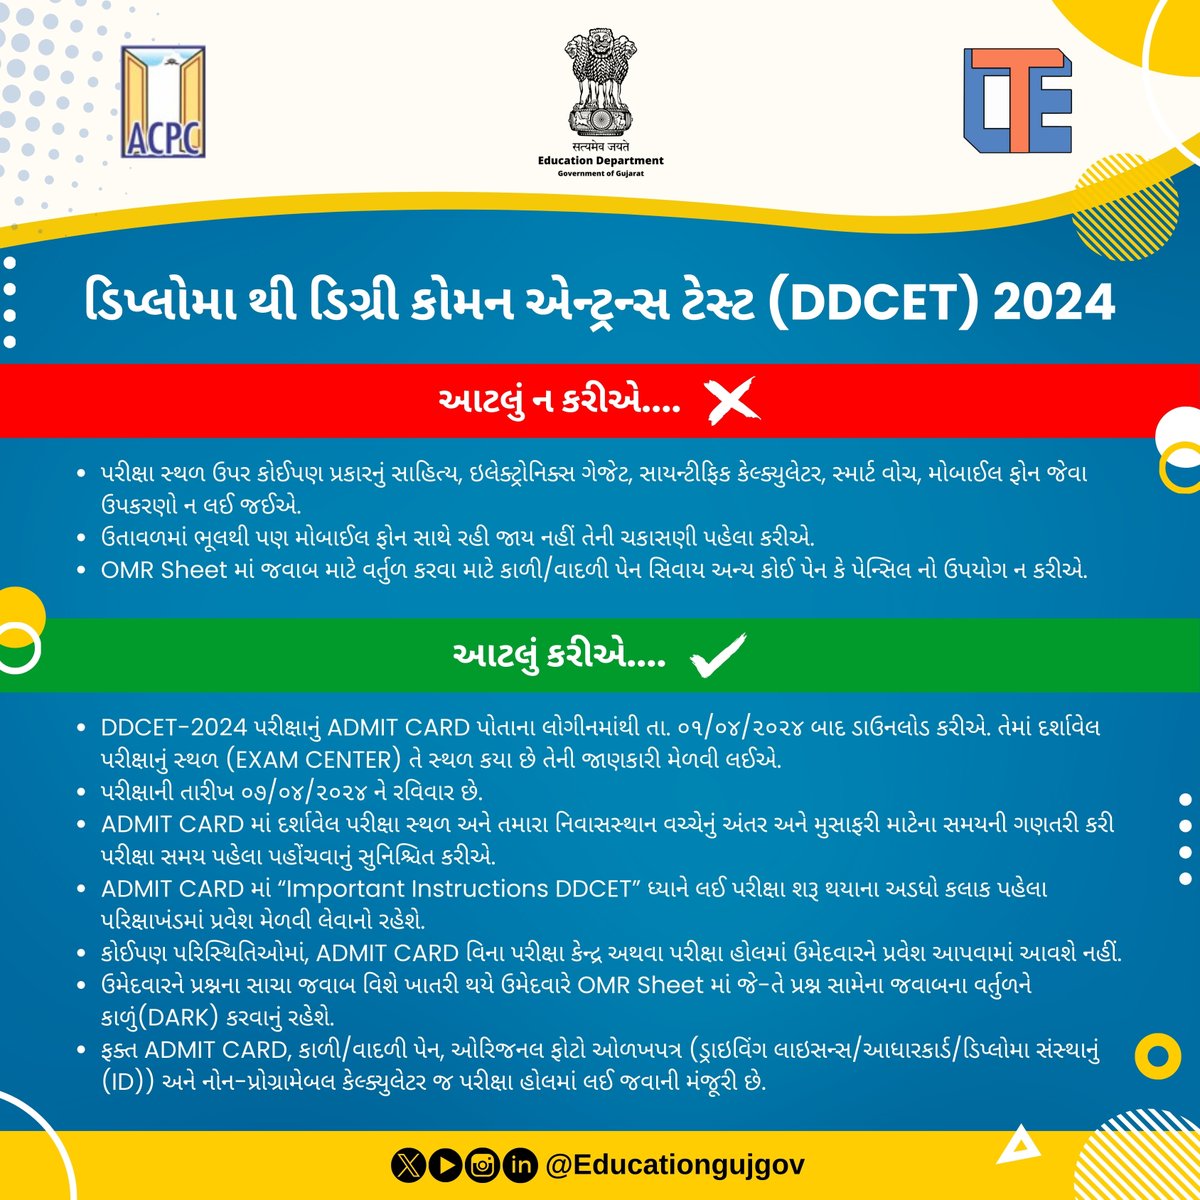 Important information for the DDCET 2024 exam! #DDCET2024 #GujaratEducationDepartment #ExamPreparation #ImportantInformation